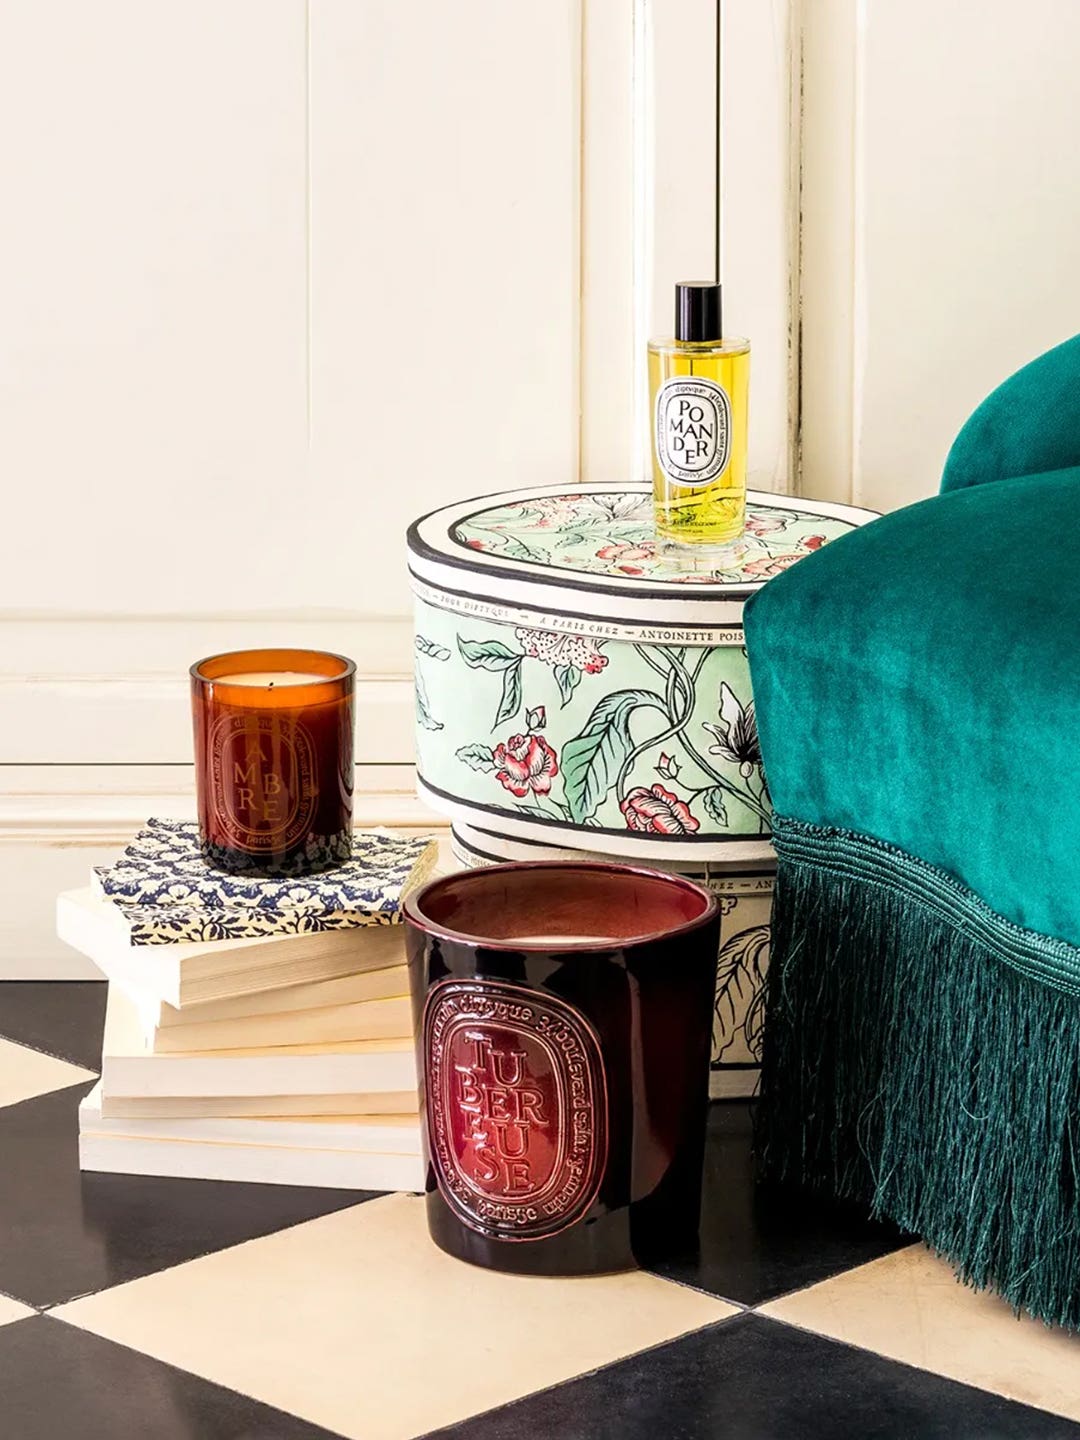 The Designer Candle Selection at the Nordstrom Anniversary Sale Is Seriously Good